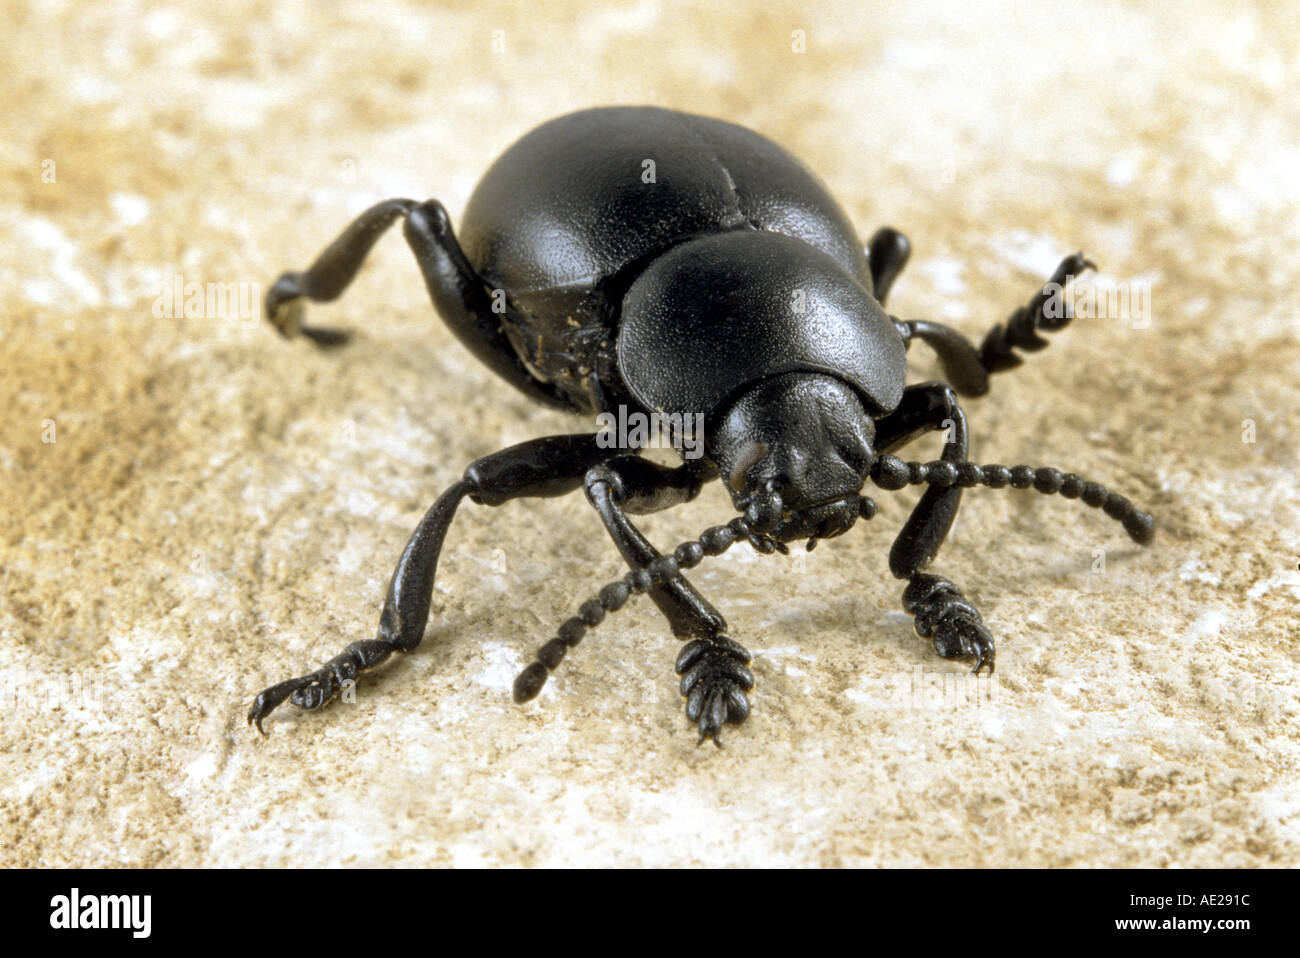 The Bloody Nosed Beetle big fat round black beetle Stock Photo